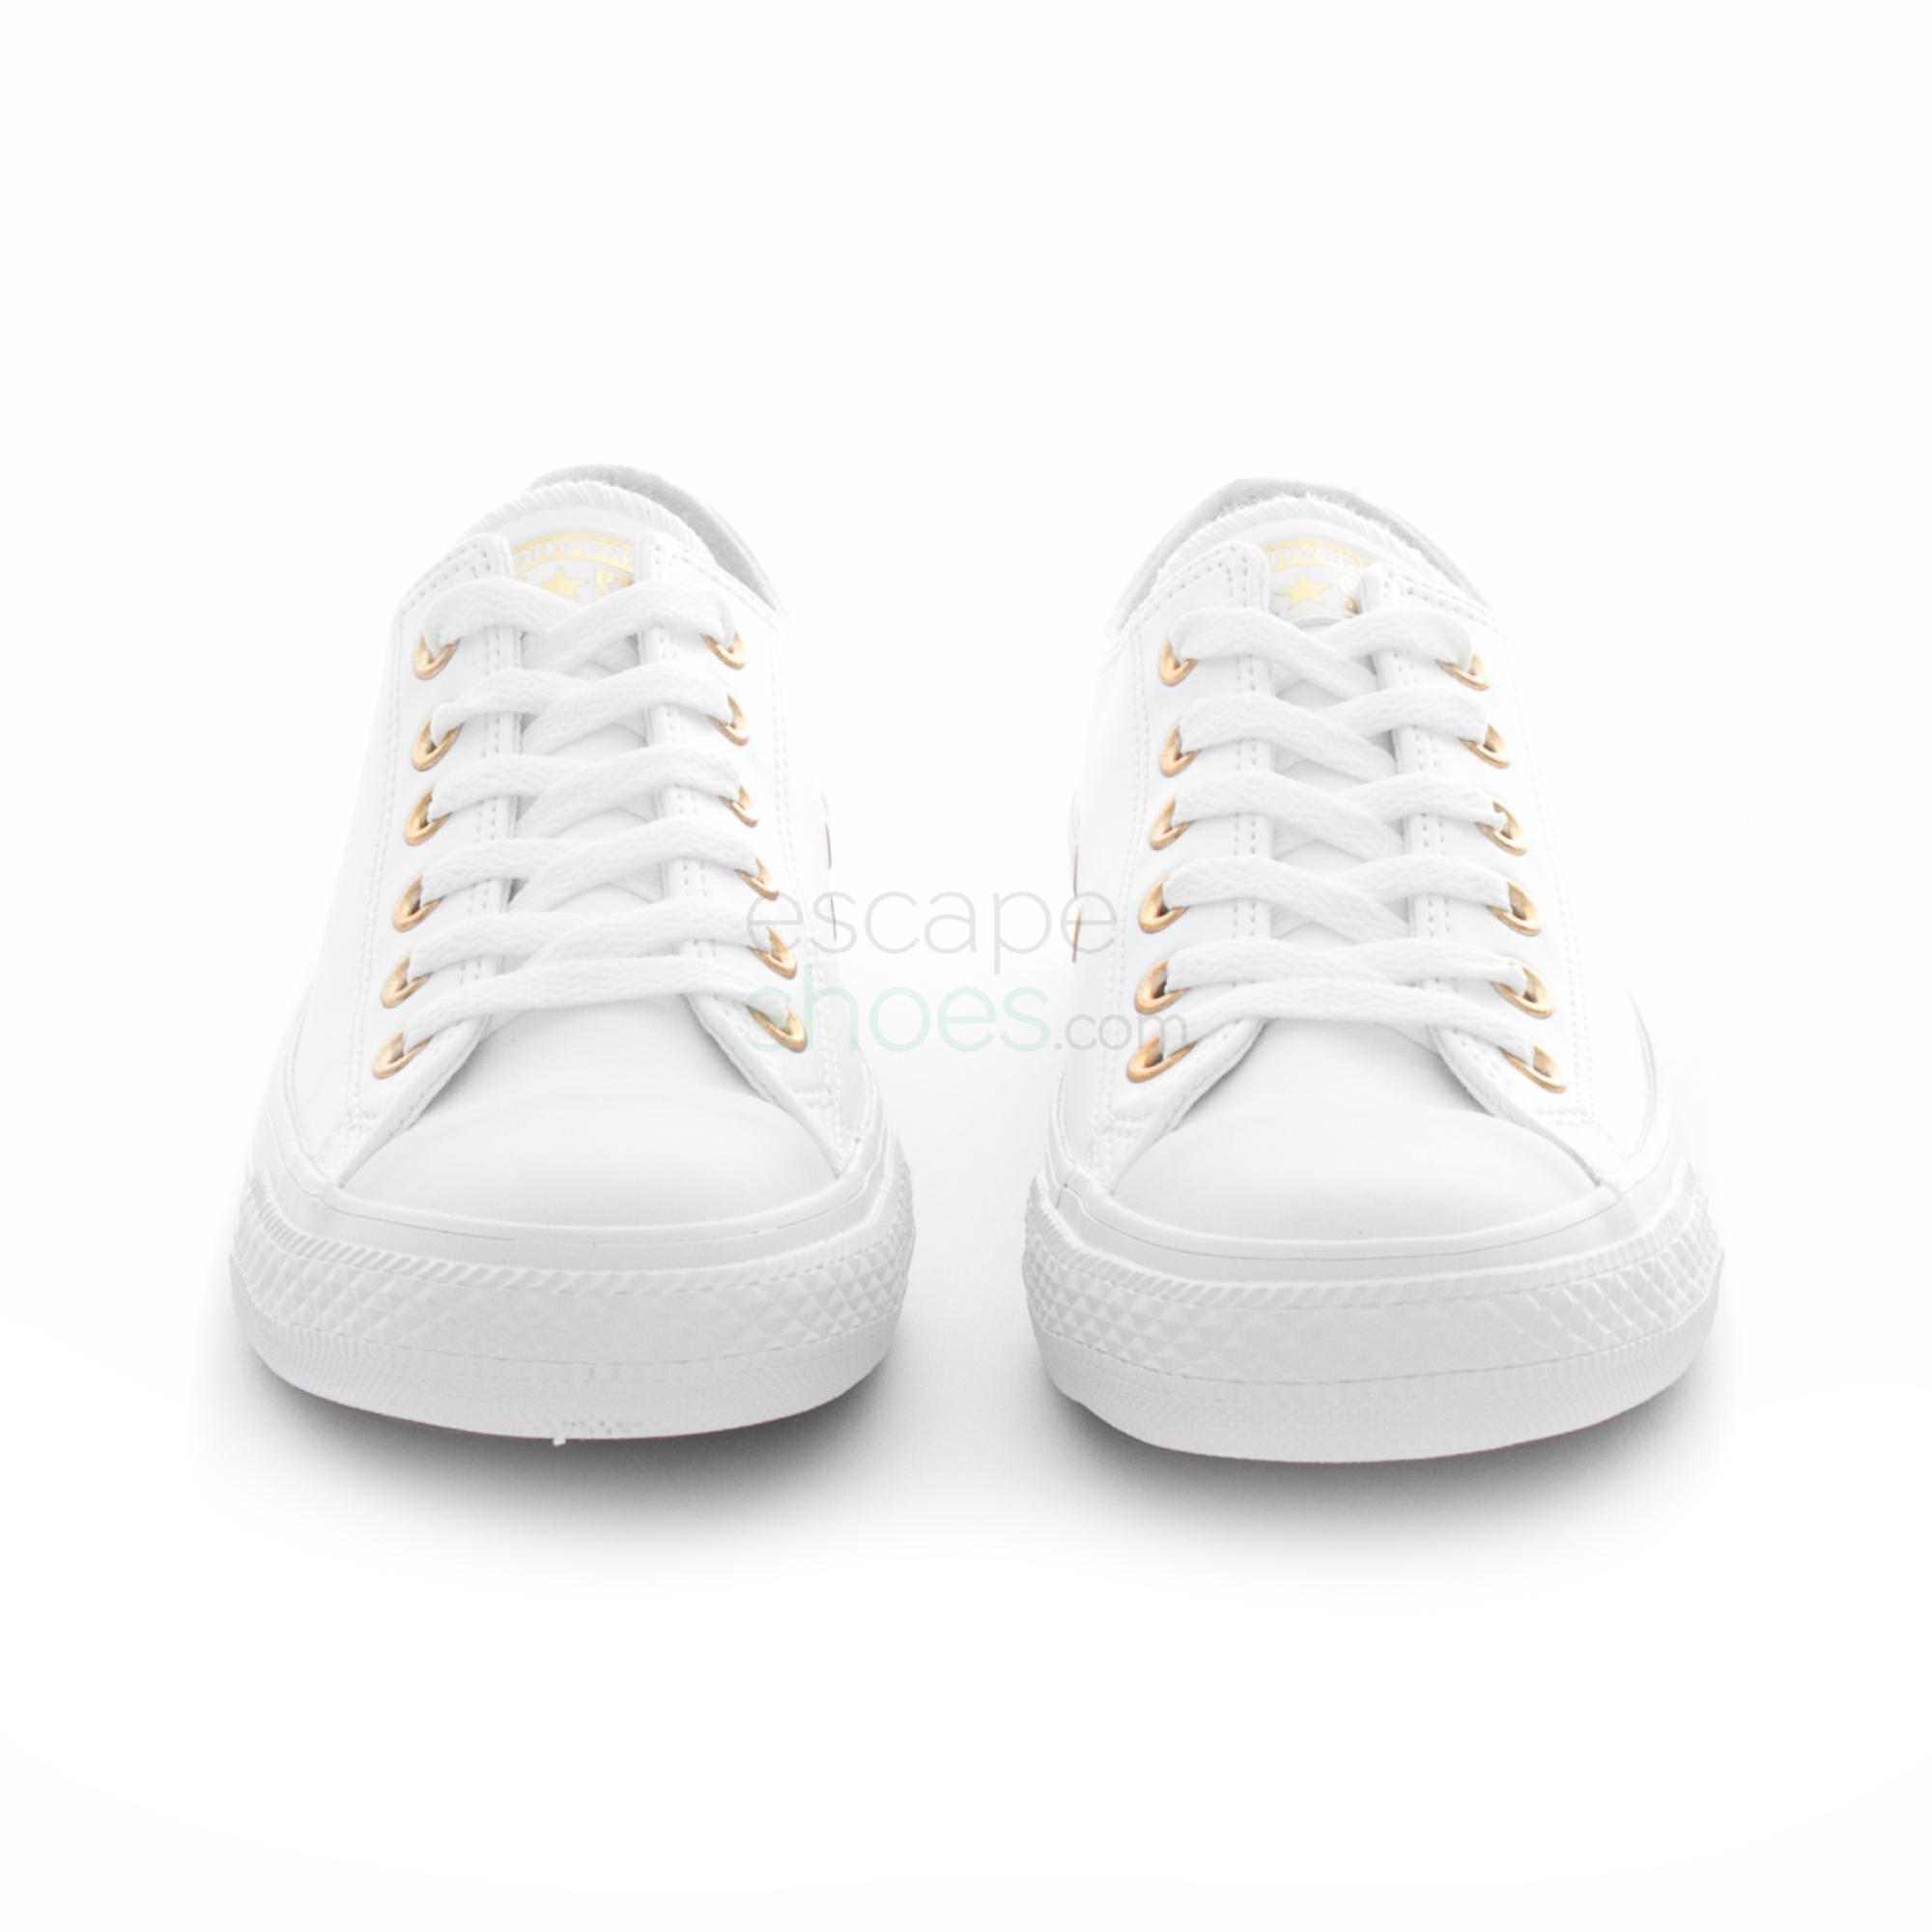 converse all star white gold